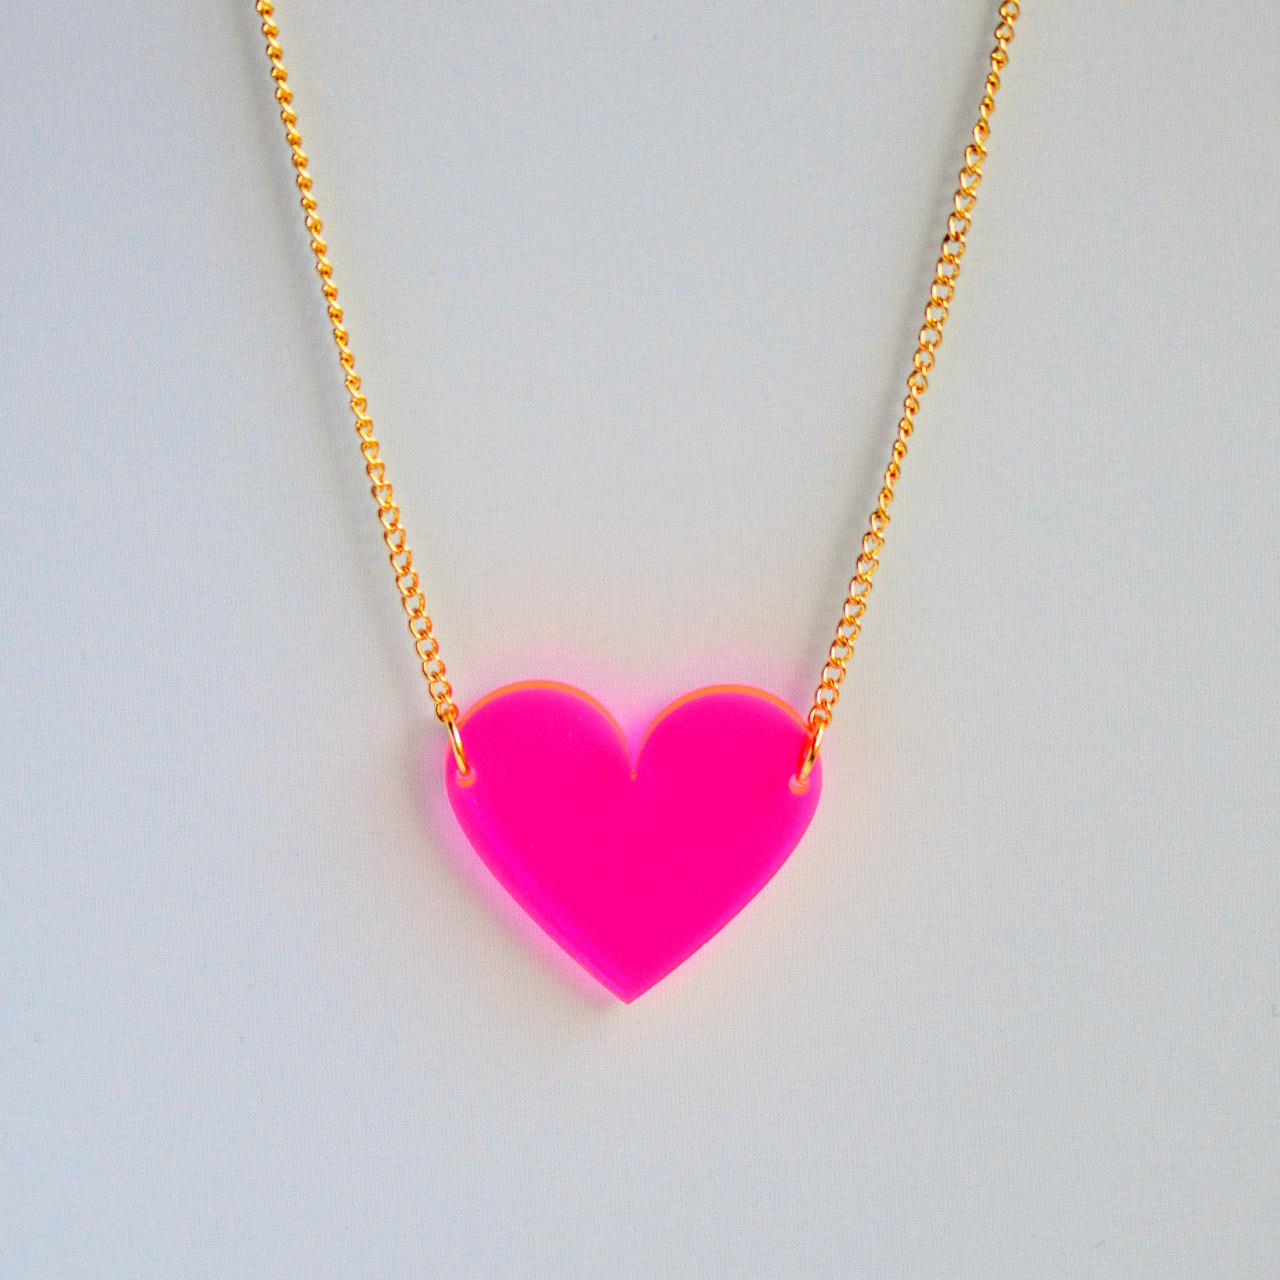 Bright Fluorescent Neon Pink Laser Cut Heart Pendant On Delicate Curb Chain // Statement Necklace